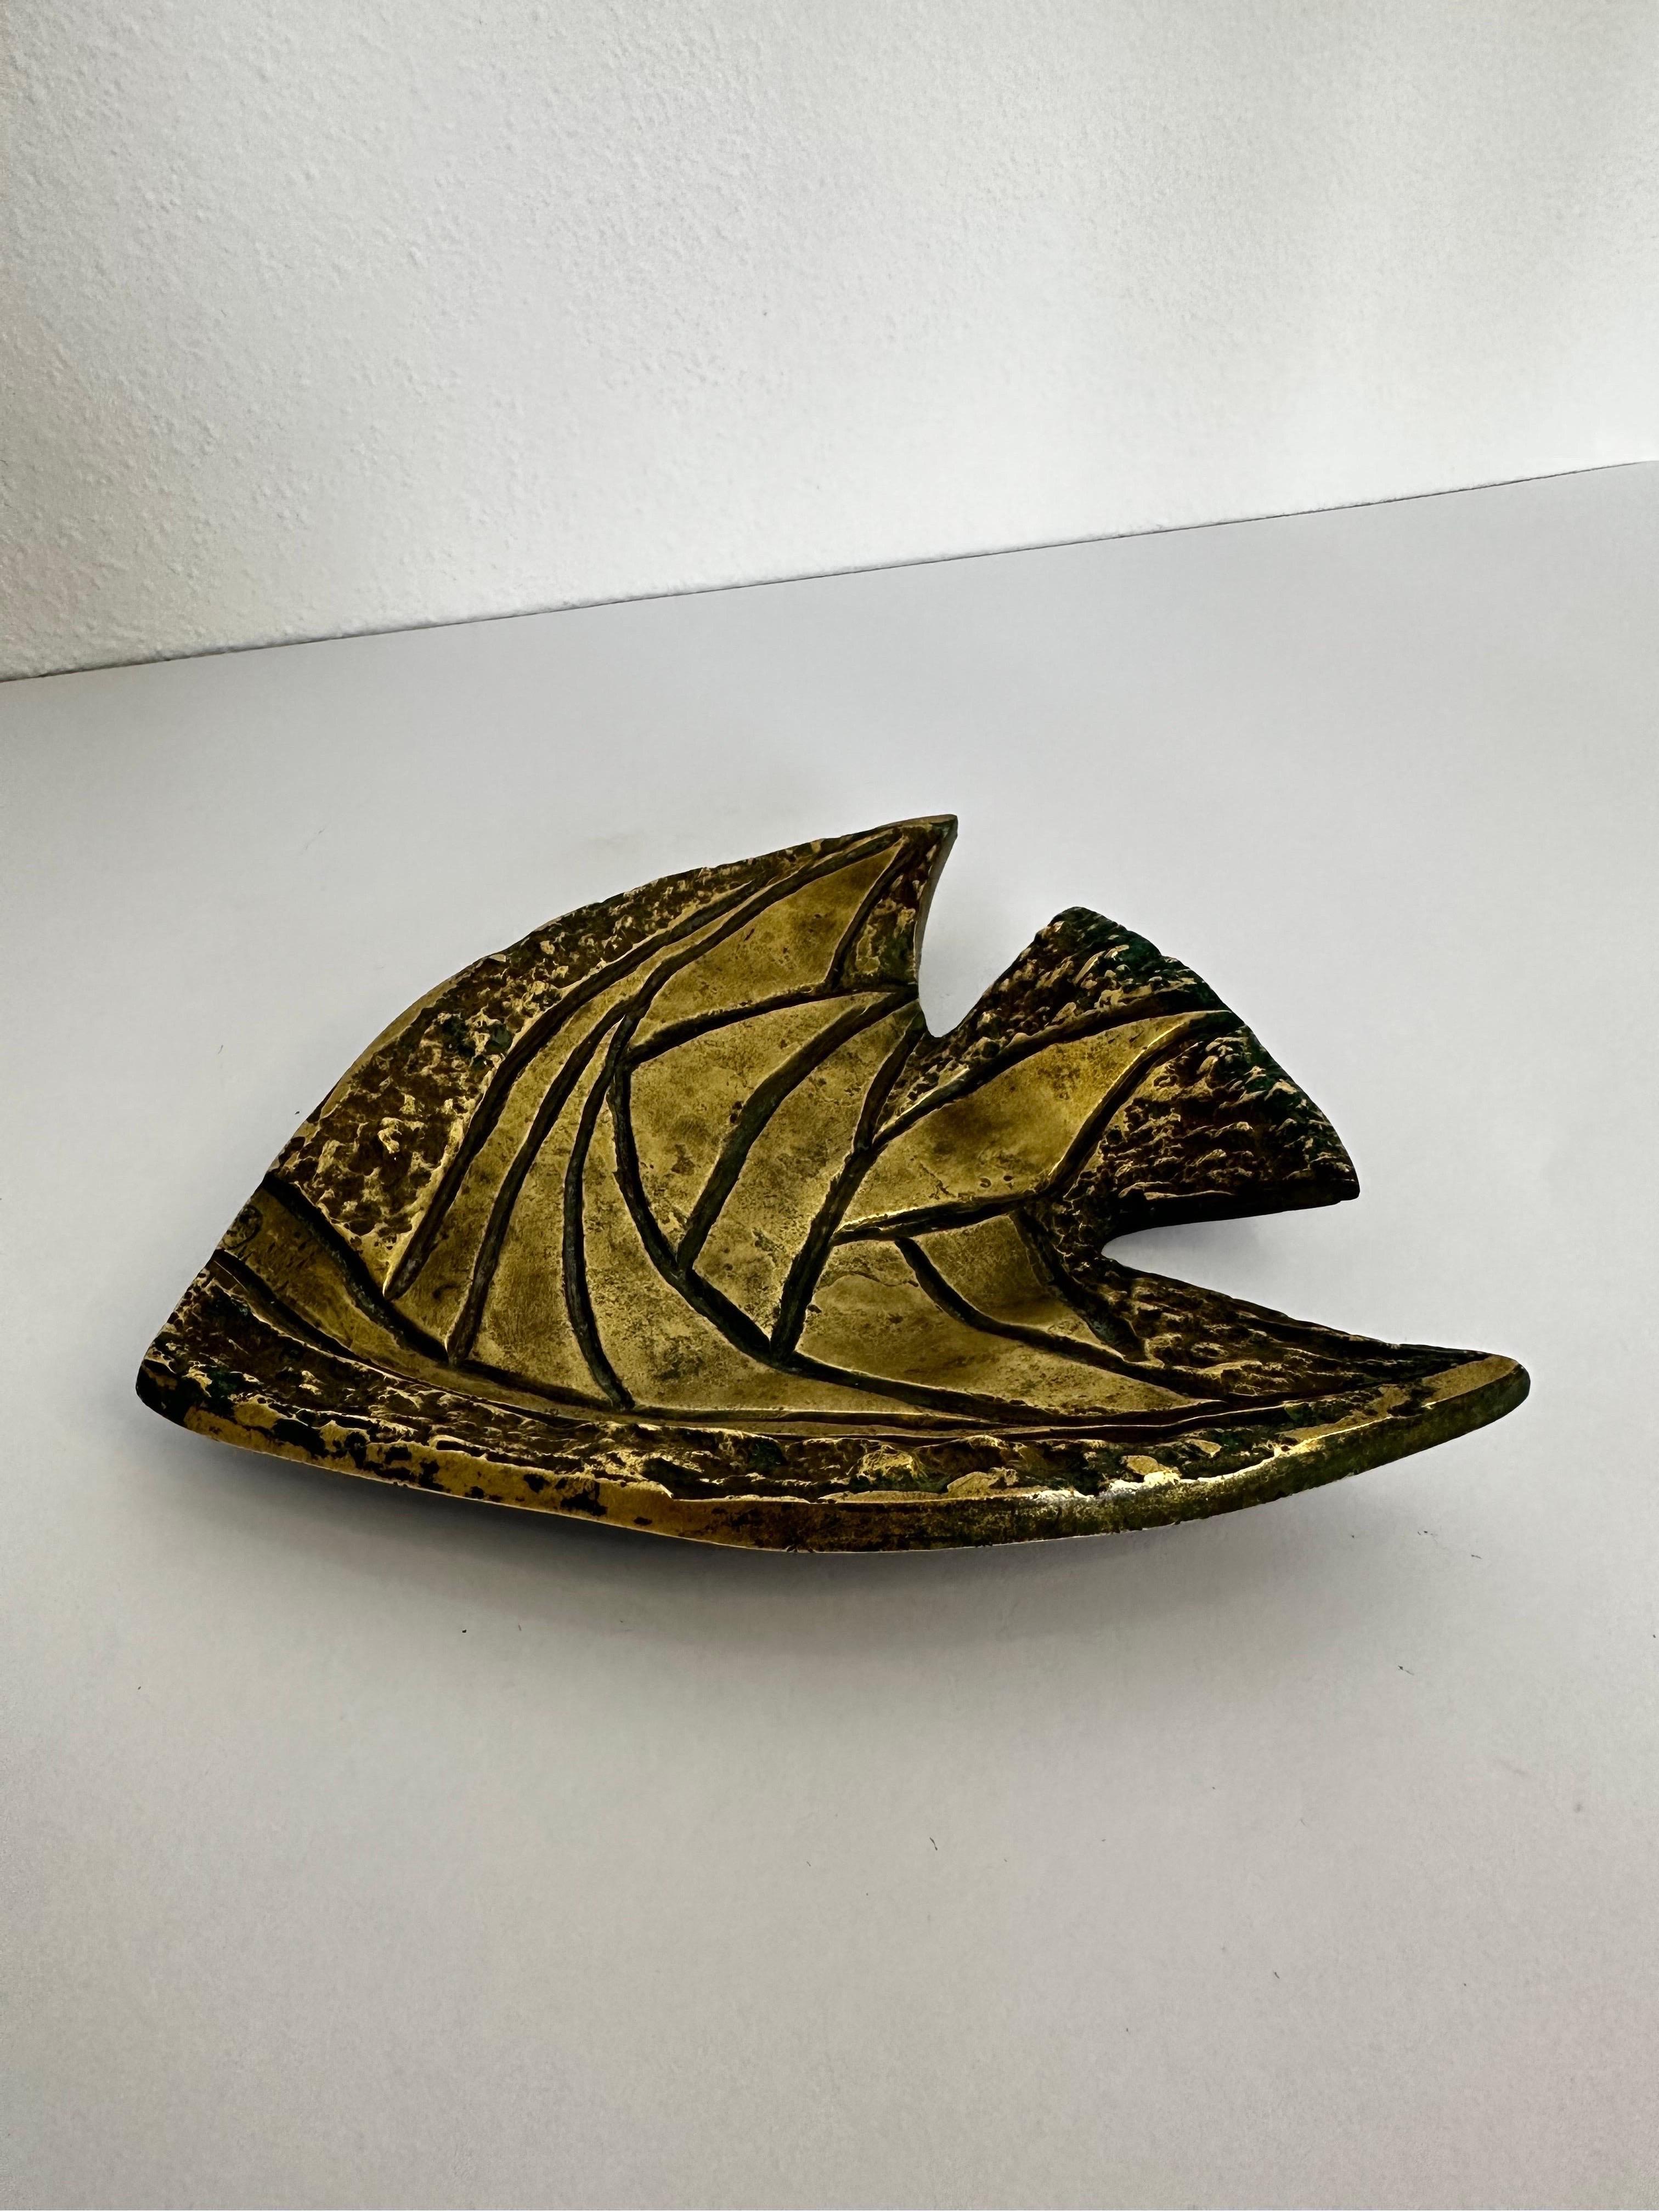 20th Century Brazilian Modern Bronze Tray or Catch All With Geometric Designs, 1960s For Sale